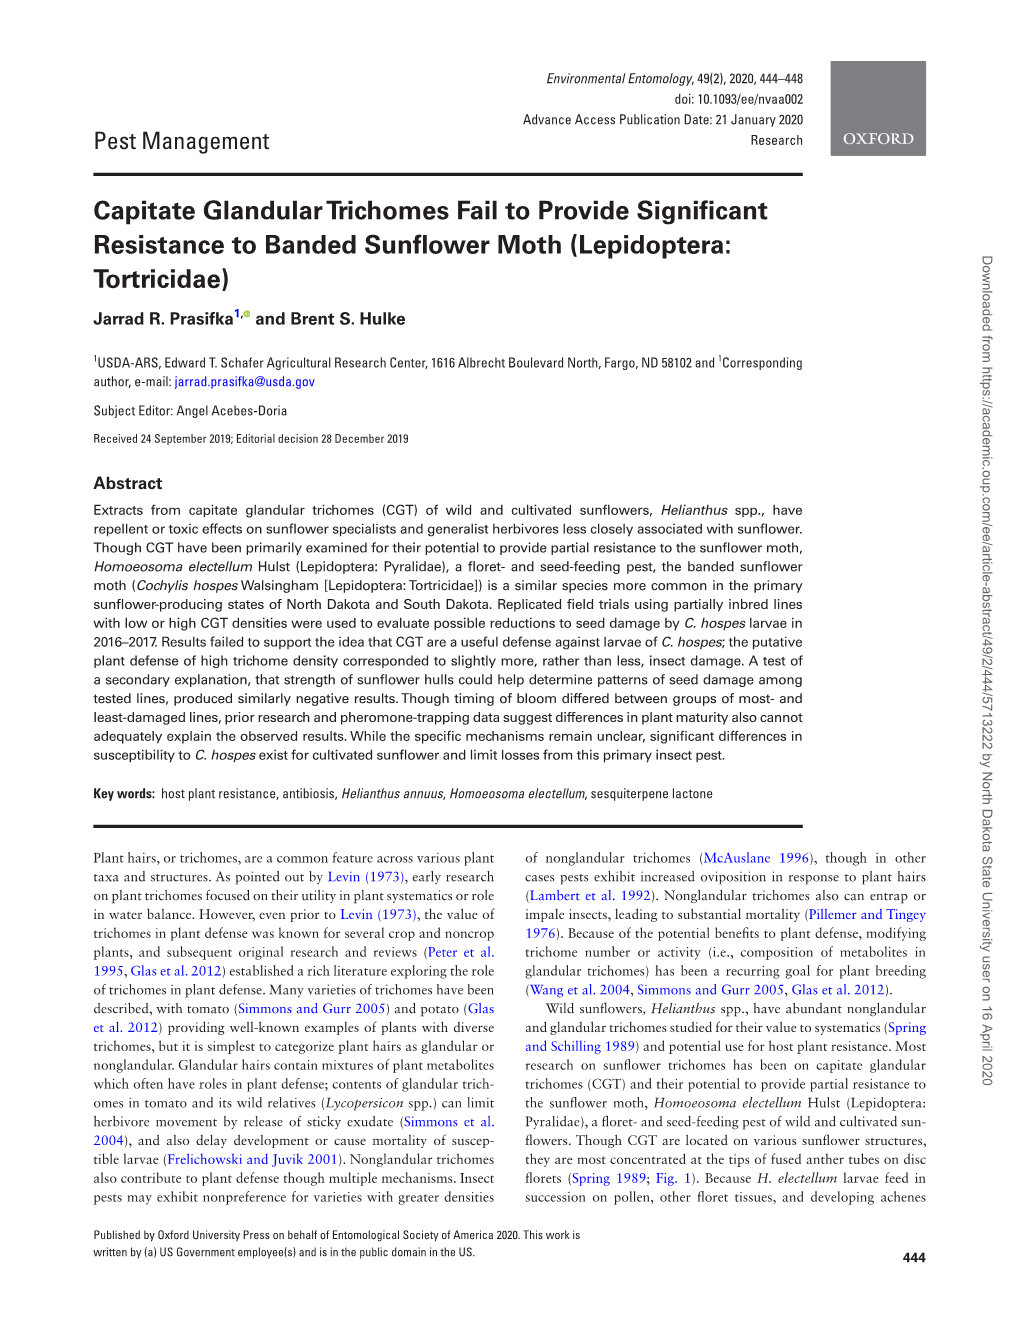 Capitate Glandular Trichomes Fail to Provide Significant Resistance To